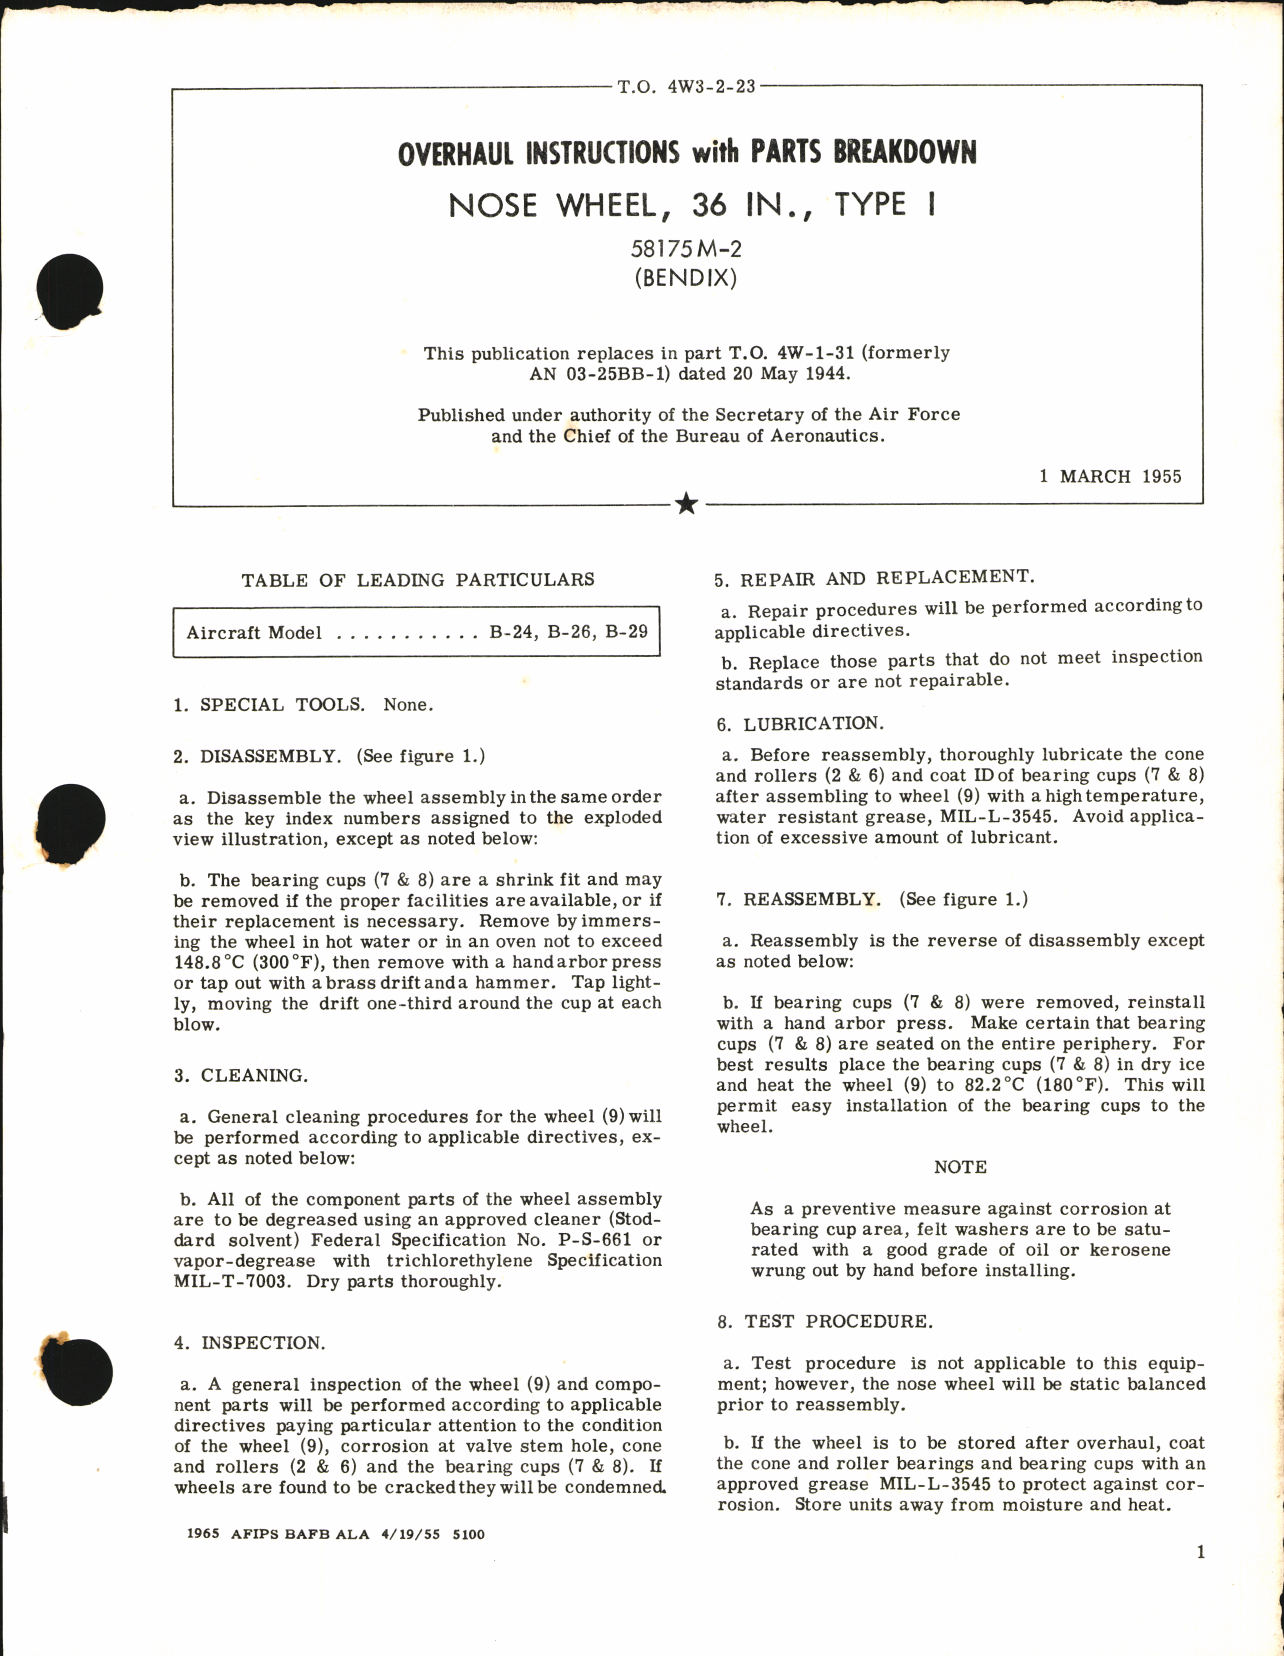 Sample page 1 from AirCorps Library document: Overhaul Instructions with Parts Breakdown for Nose Wheel 36 In., Type I